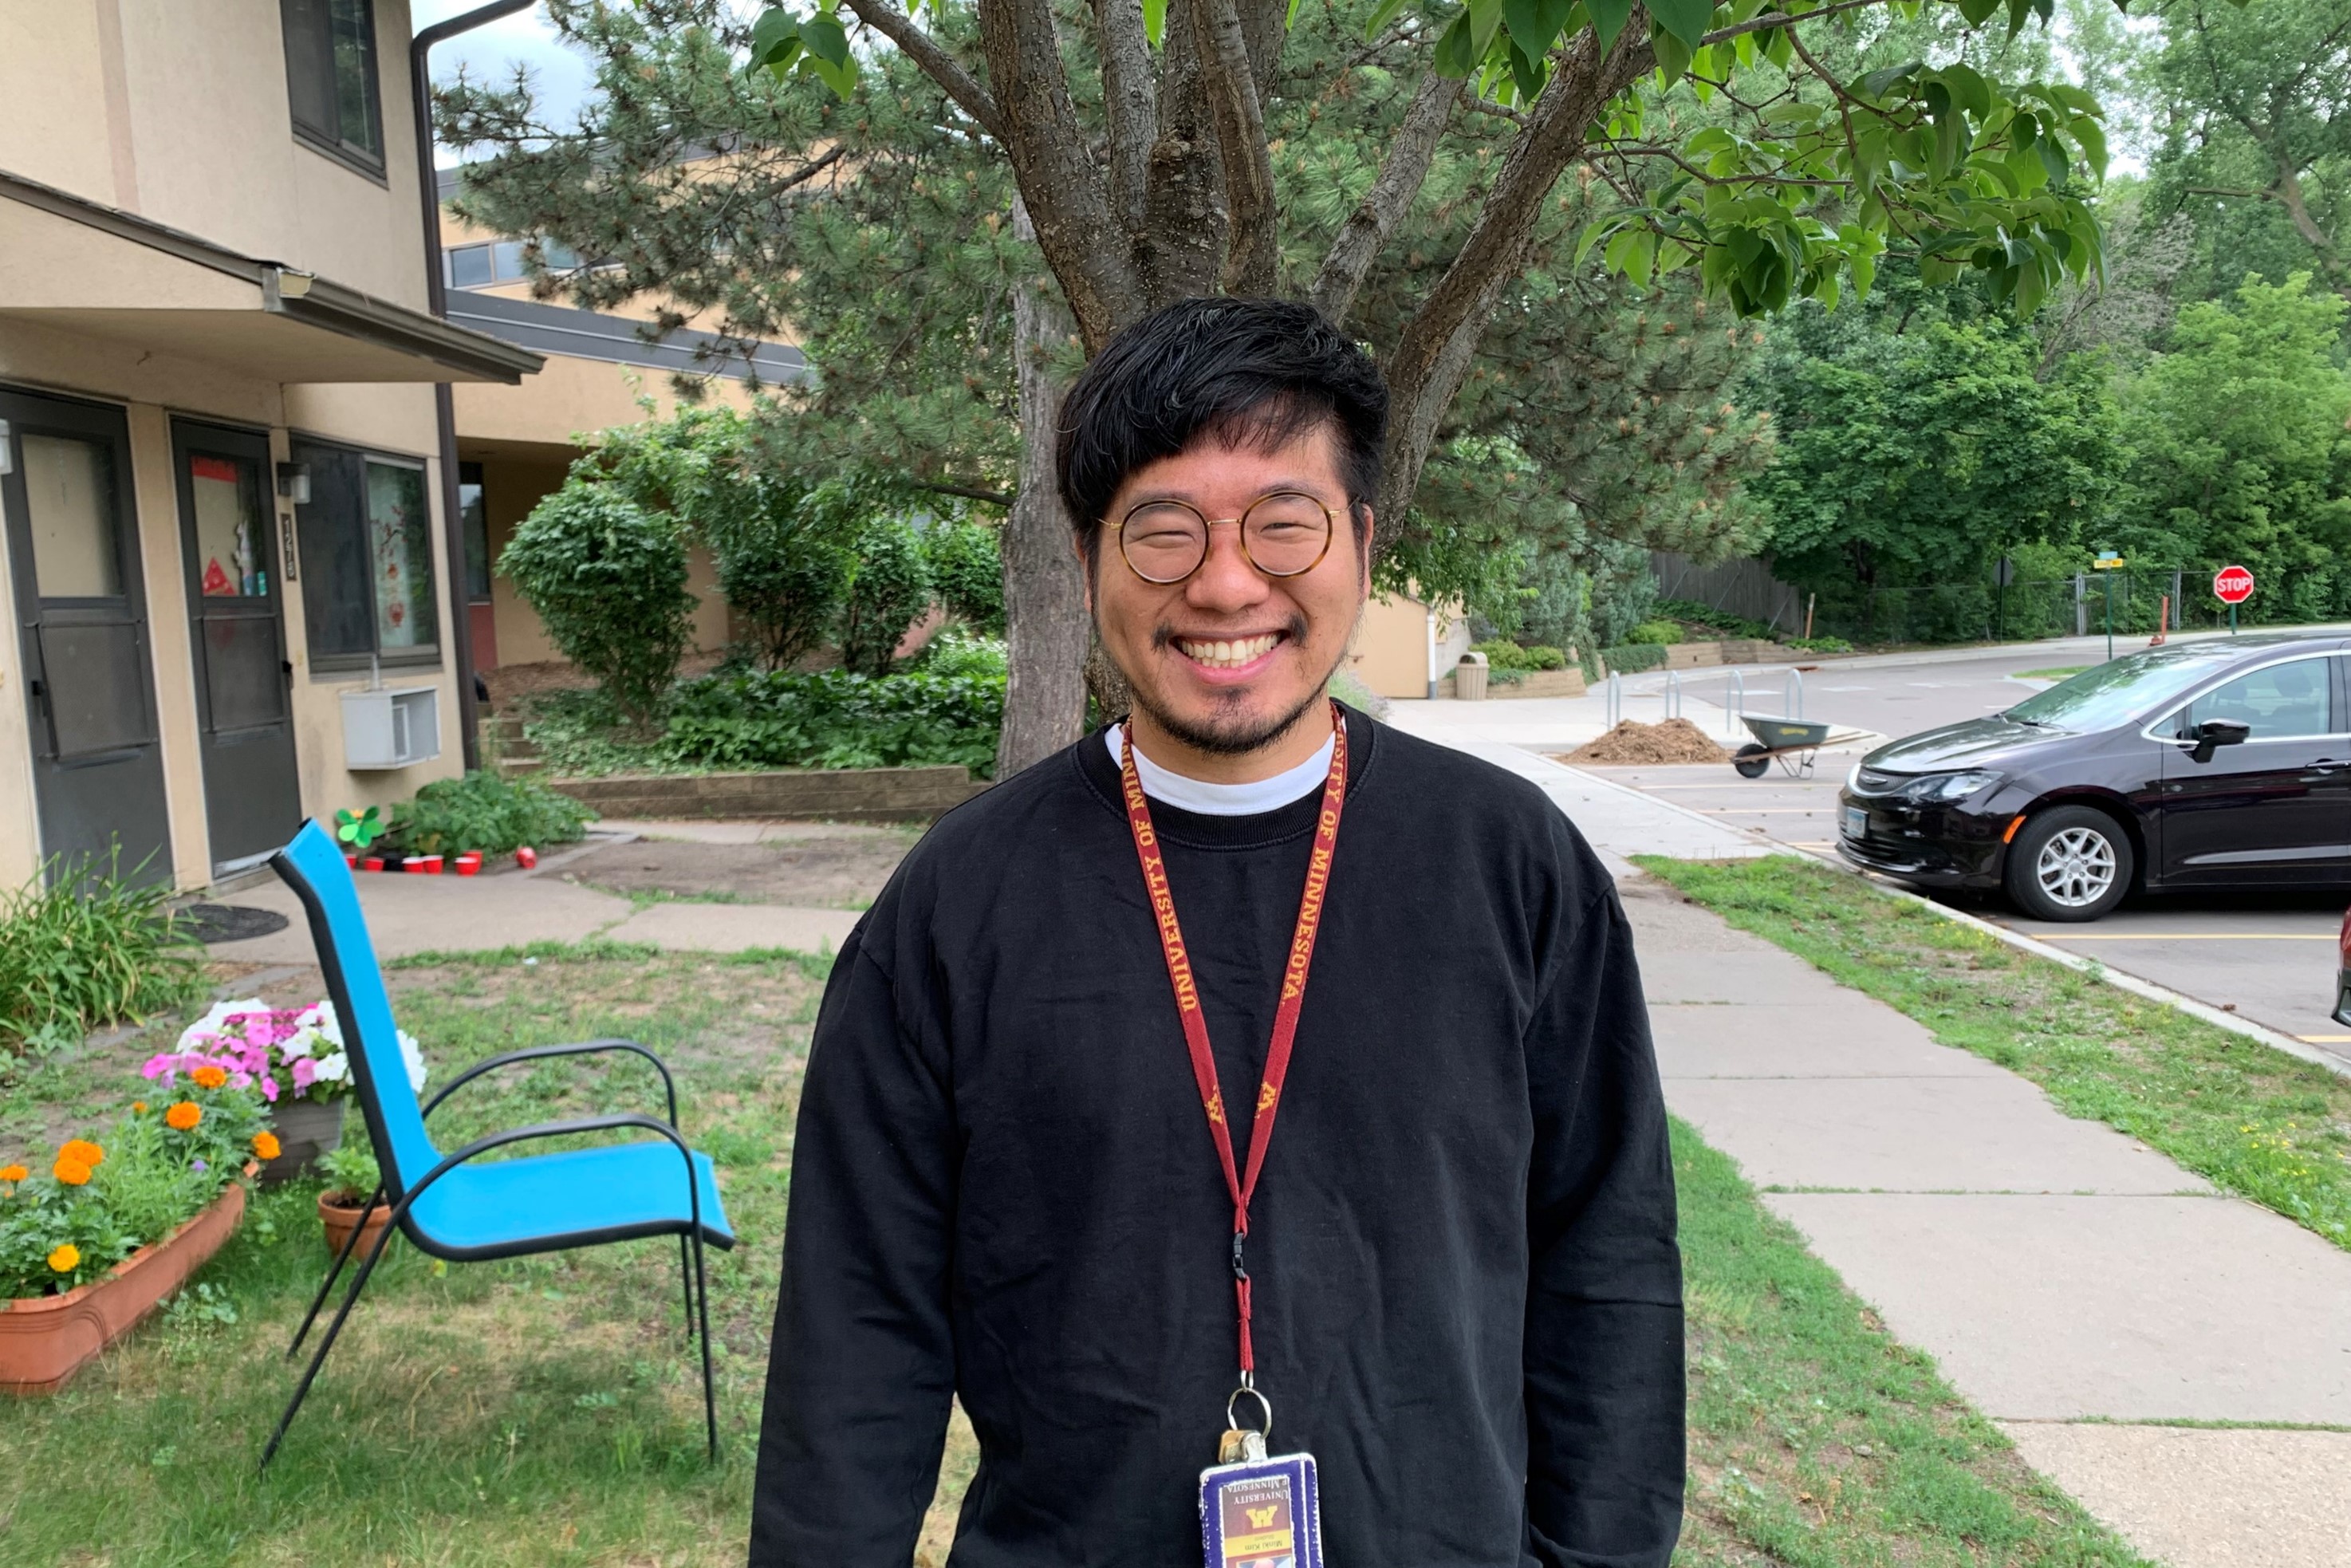 Doctoral student Minki Kim standing outdoors on a lawn